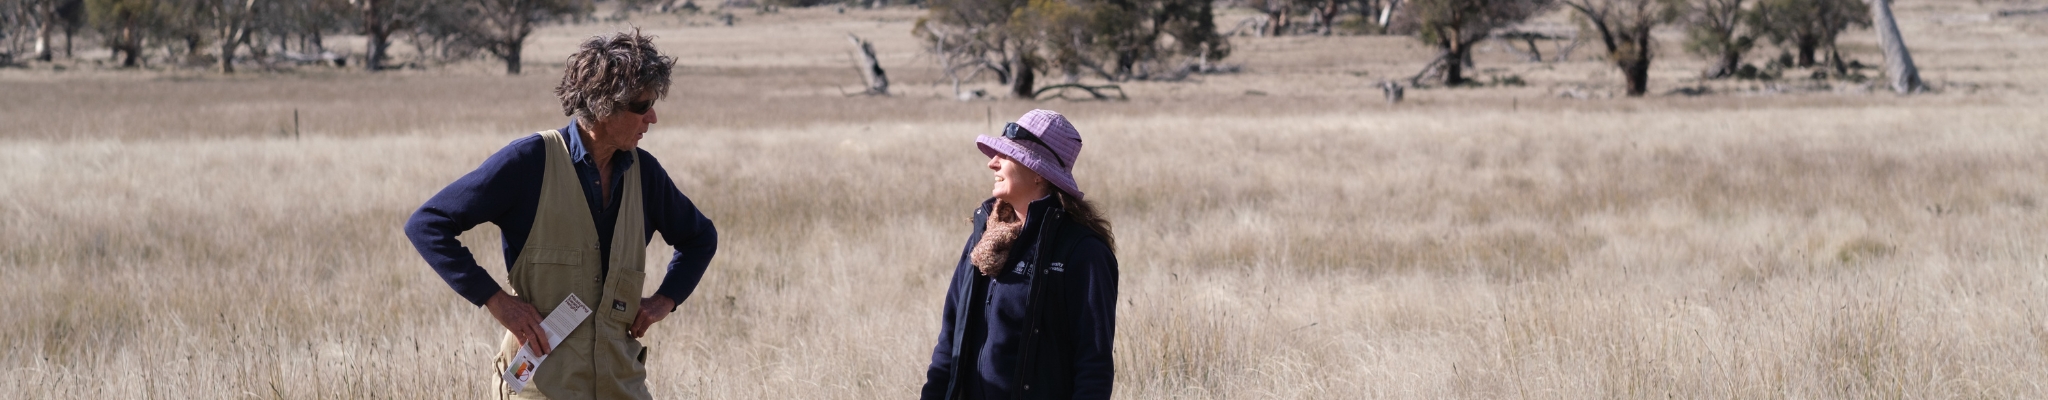 A landholder stands in a grassy paddock with a uniformed NSW Biodiversity Conservation Trust staff member